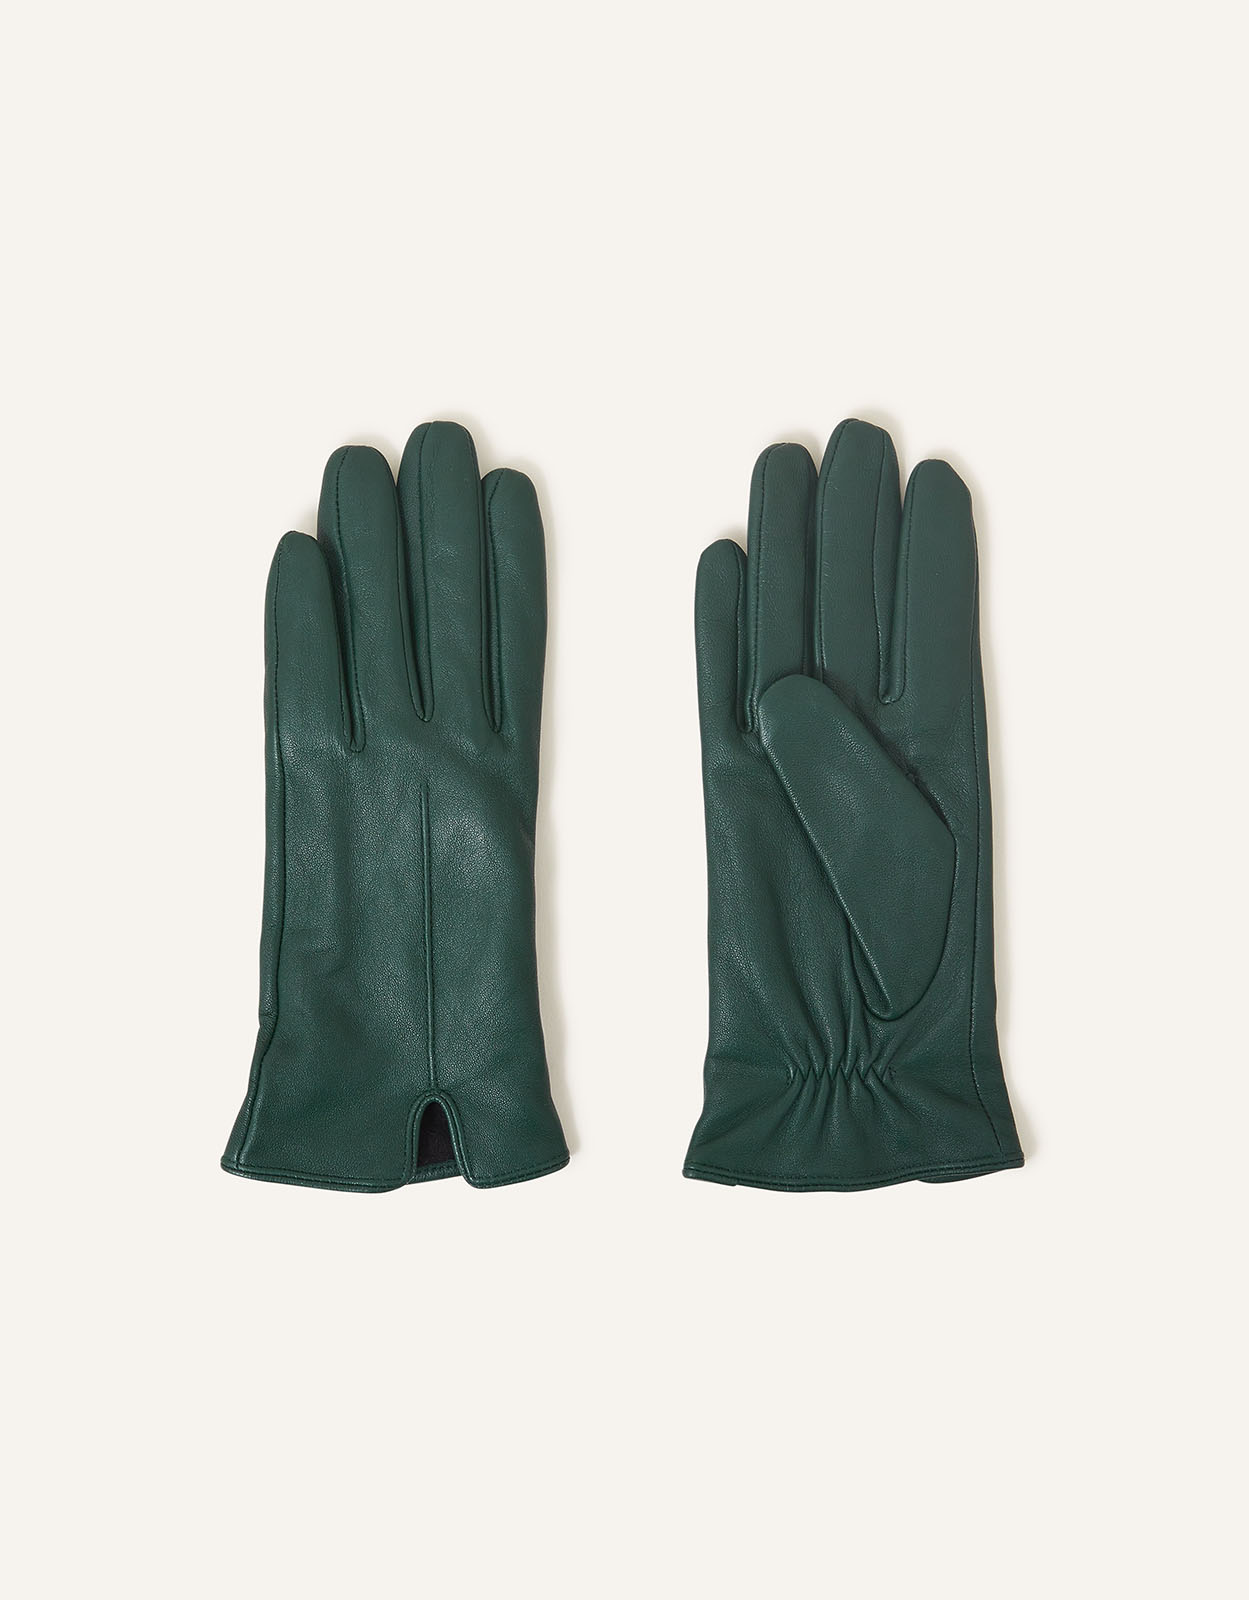 Accessorize Women's Green Leather Luxe Gloves, Size: S / M